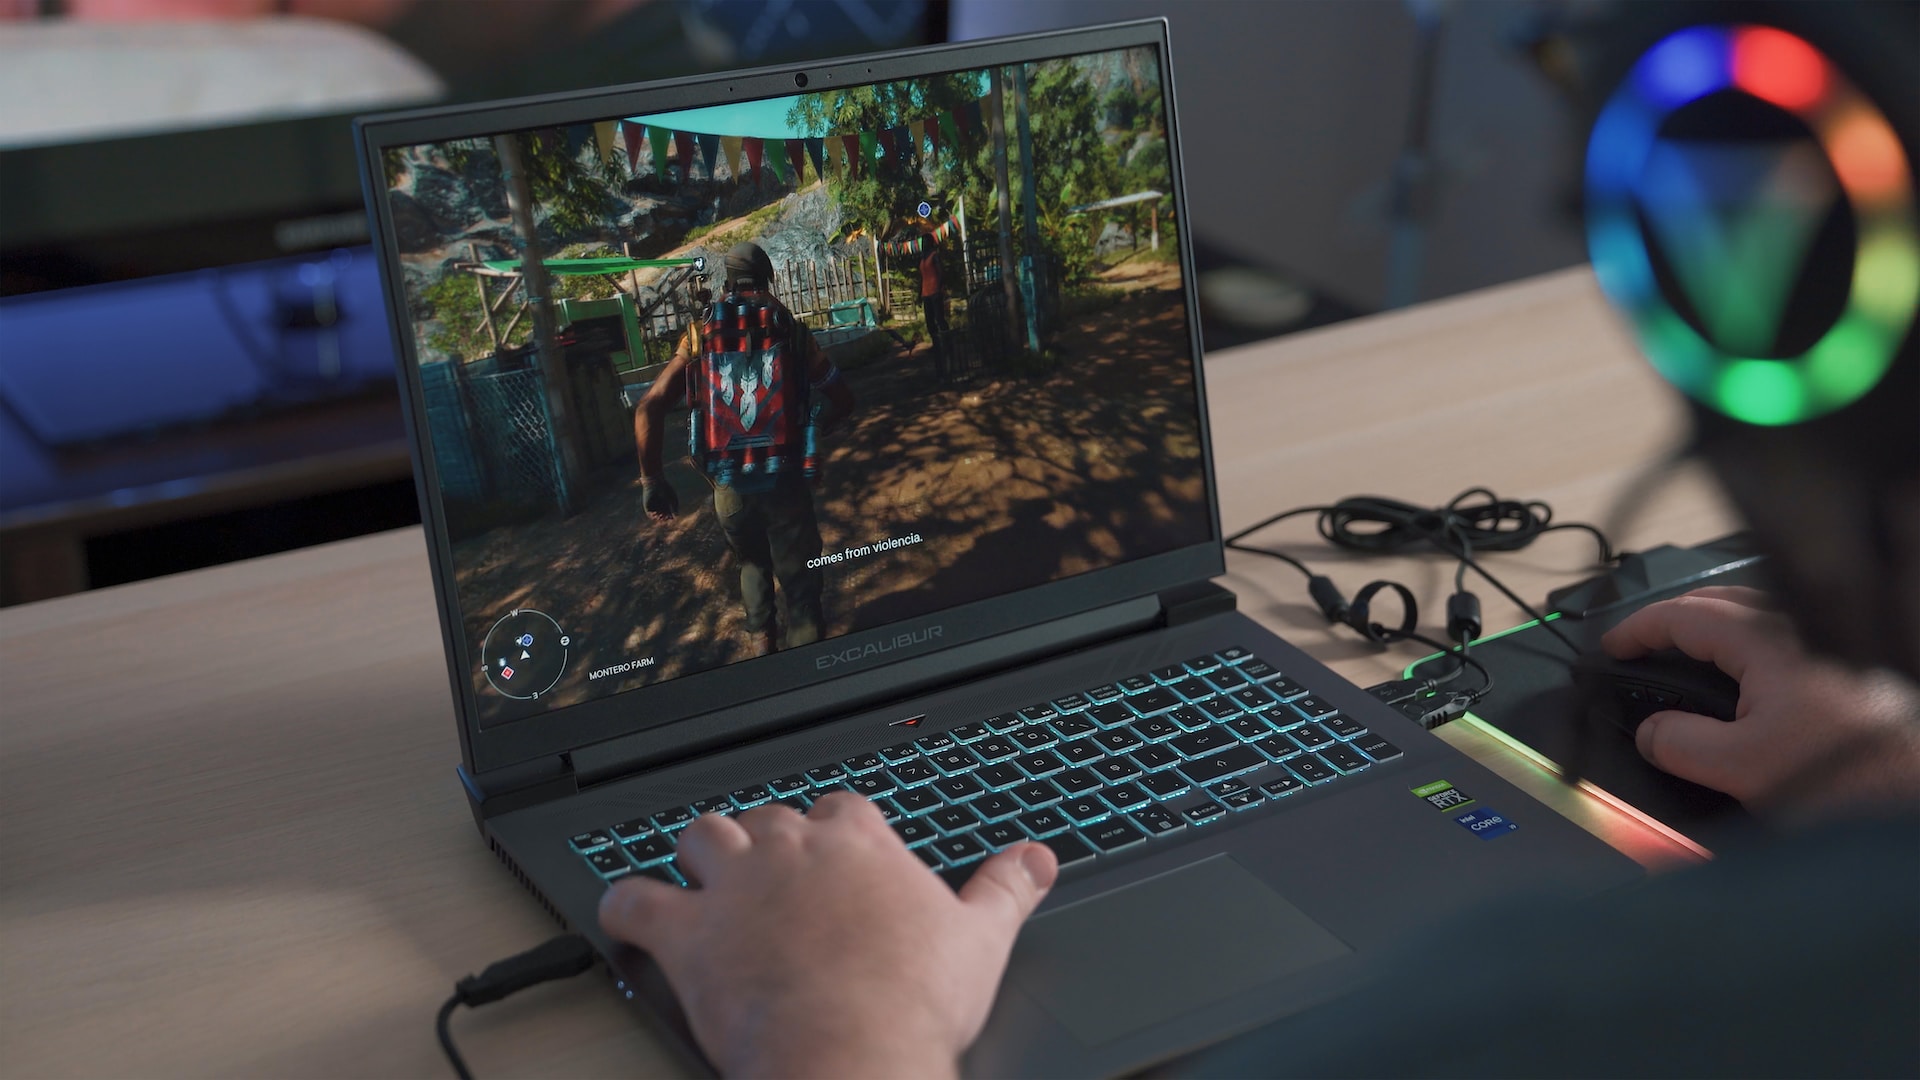 The Best RTX 3080 Ti Laptops: Our Top 5 Picks